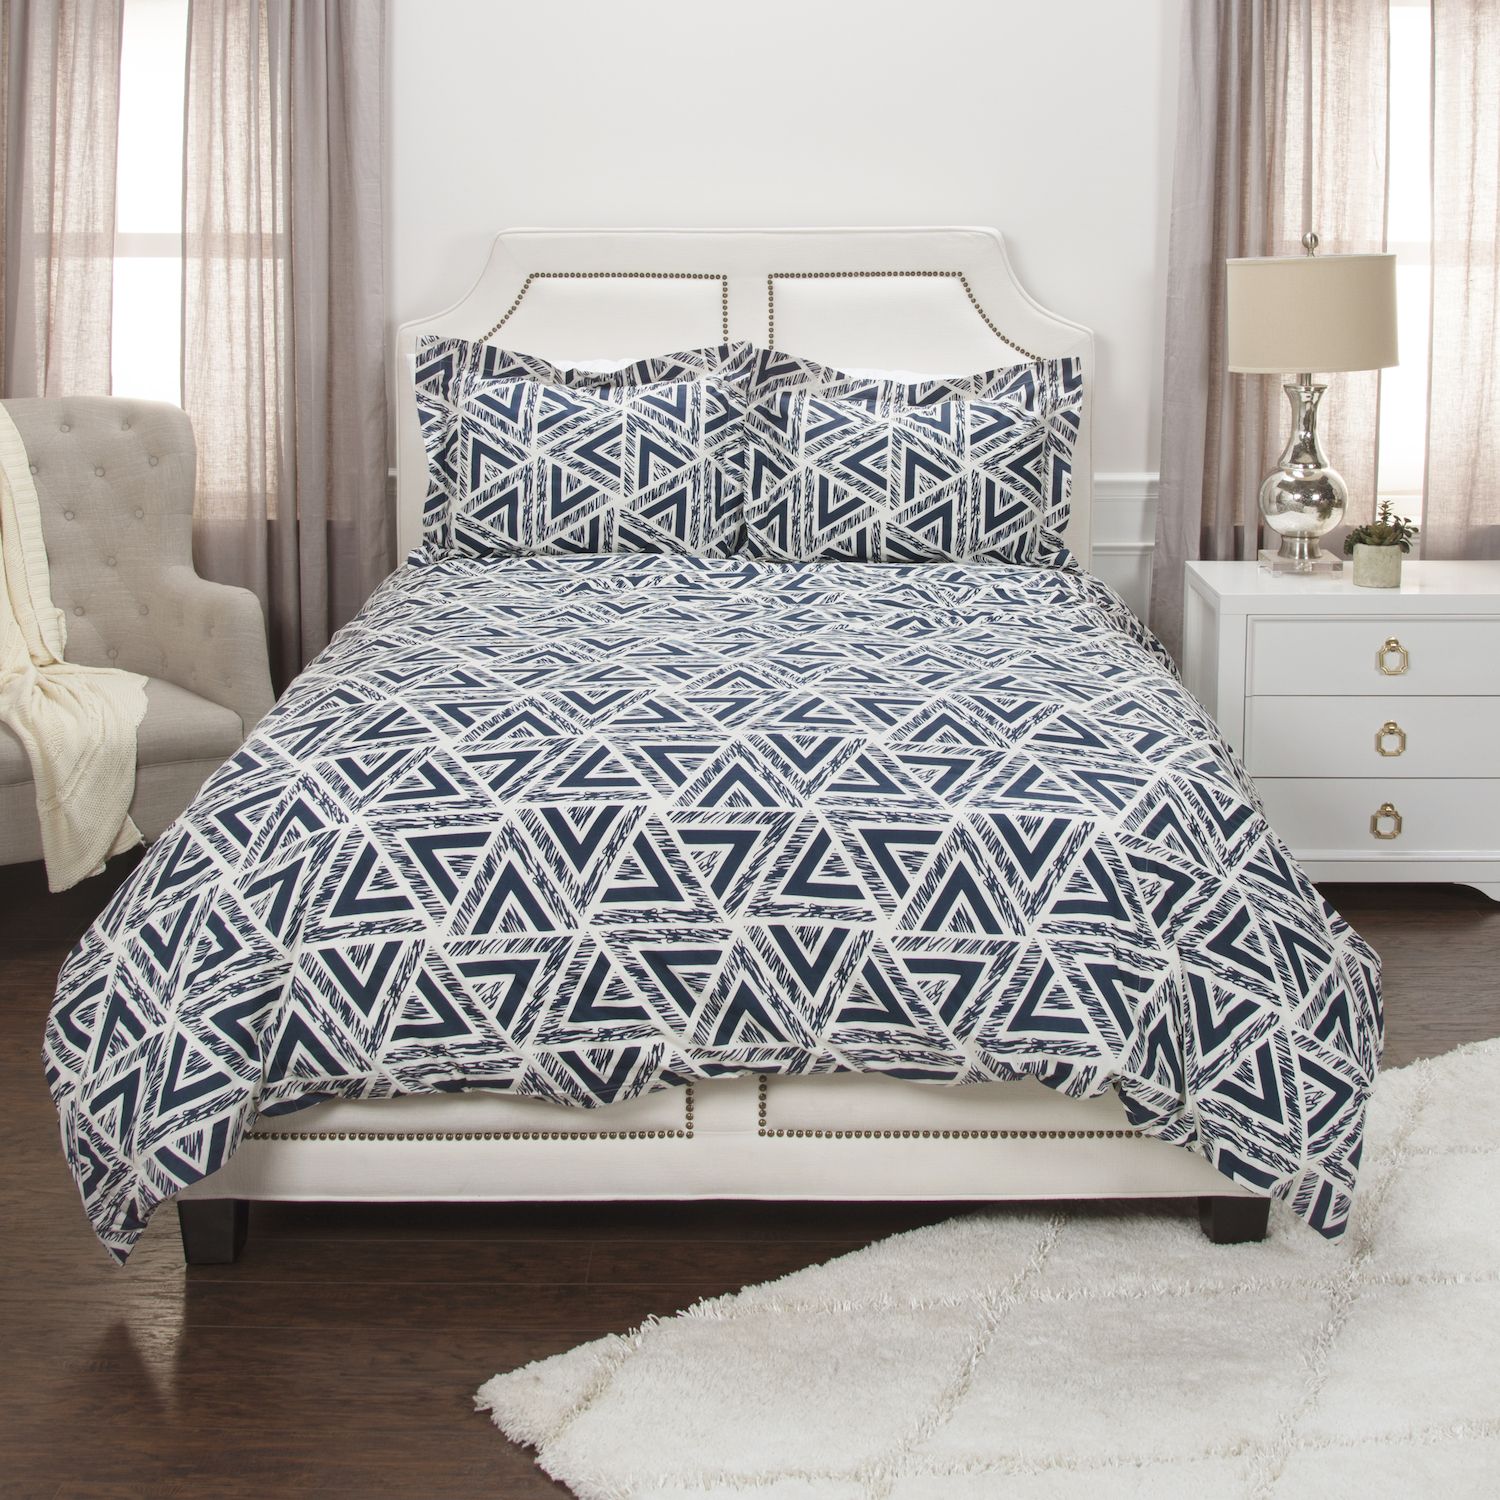 Image for Donny Osmond My Perfect Rhyme Duvet Cover Set at Kohl's.